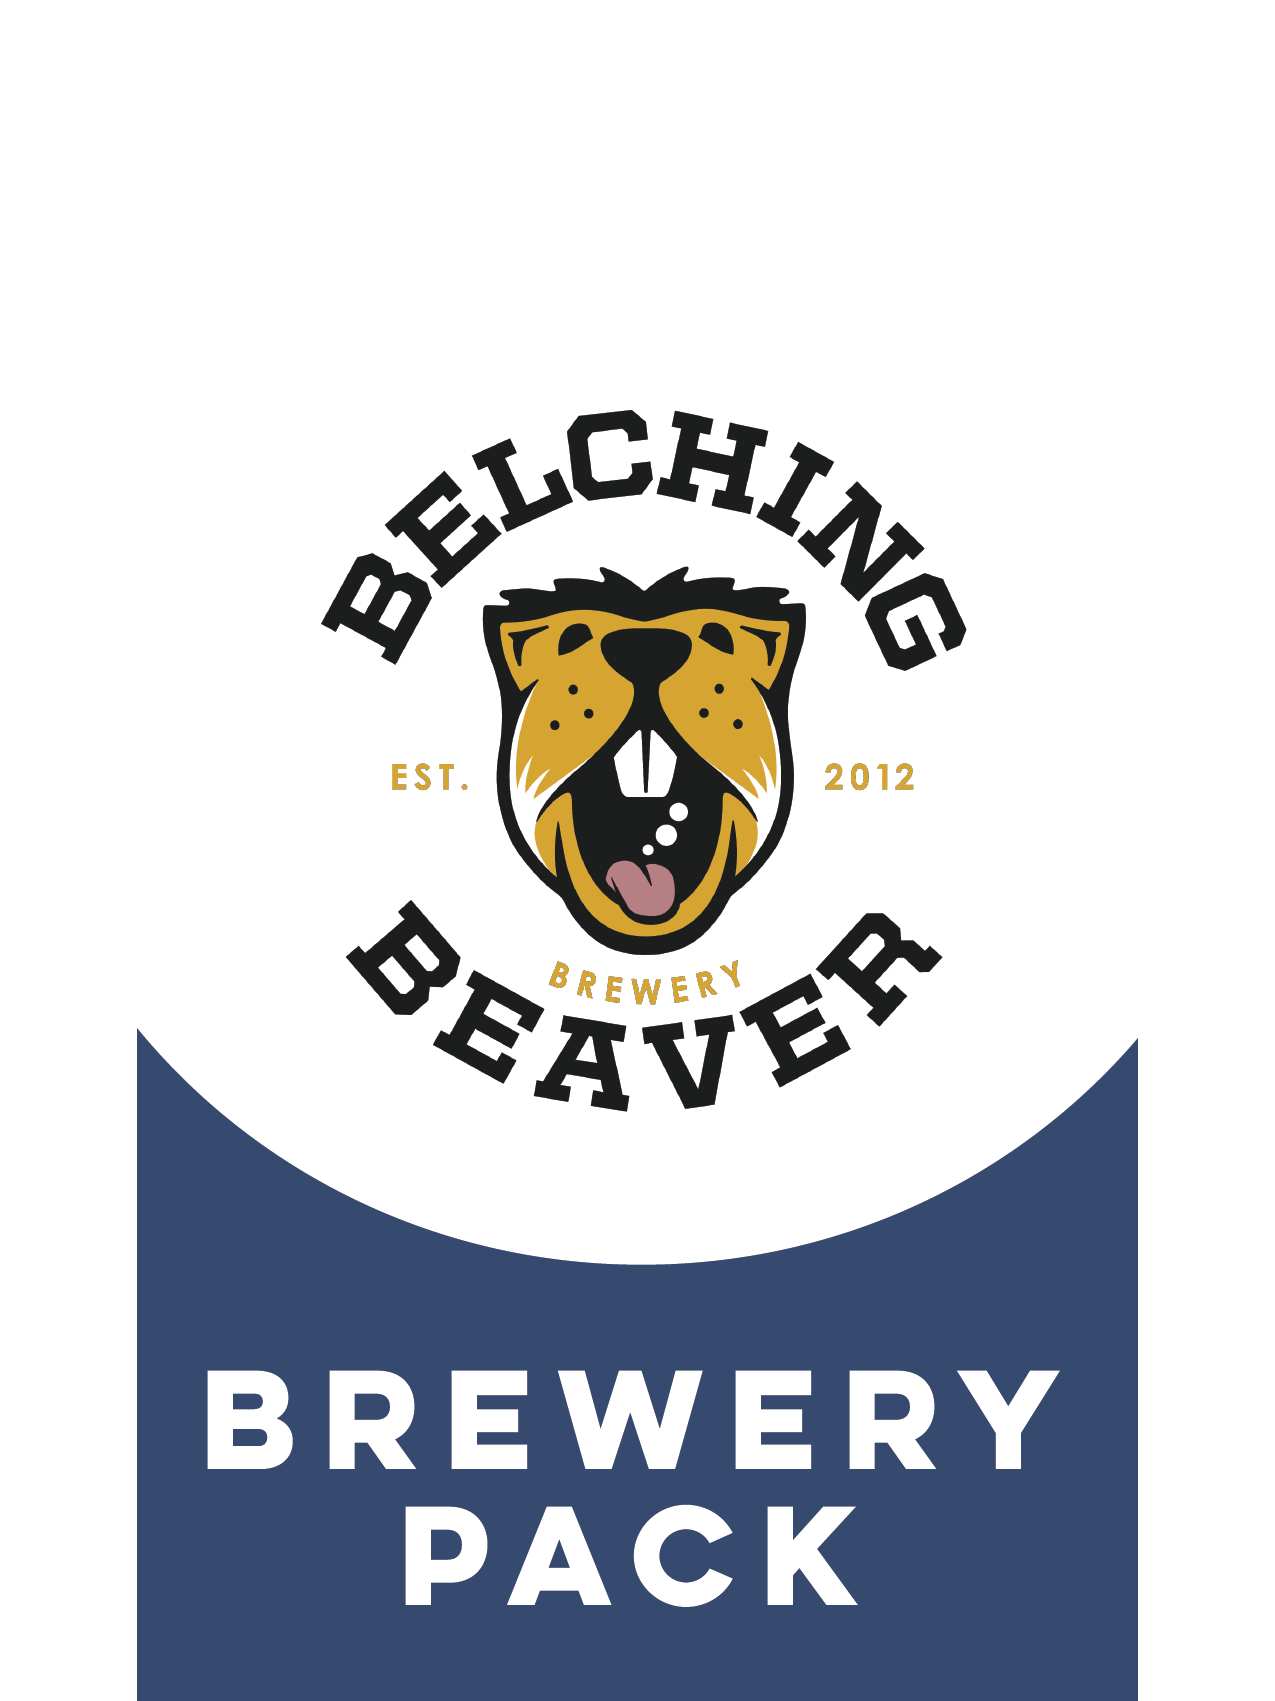 -Belching Beaver- Belching Beaver Brewery Pack-Packs & Cases- Only @ Beer Republic - The best online beer store for American & Canadian craft beer - Buy beer online from the USA and Canada - Bier online kopen - Amerikaans bier kopen - Craft beer store - Craft beer kopen - Amerikanisch bier kaufen - Bier online kaufen - Acheter biere online - IPA - Stout - Porter - New England IPA - Hazy IPA - Imperial Stout - Barrel Aged - Barrel Aged Imperial Stout - Brown - Dark beer - Blond - Blonde - Pilsner - Lager - W